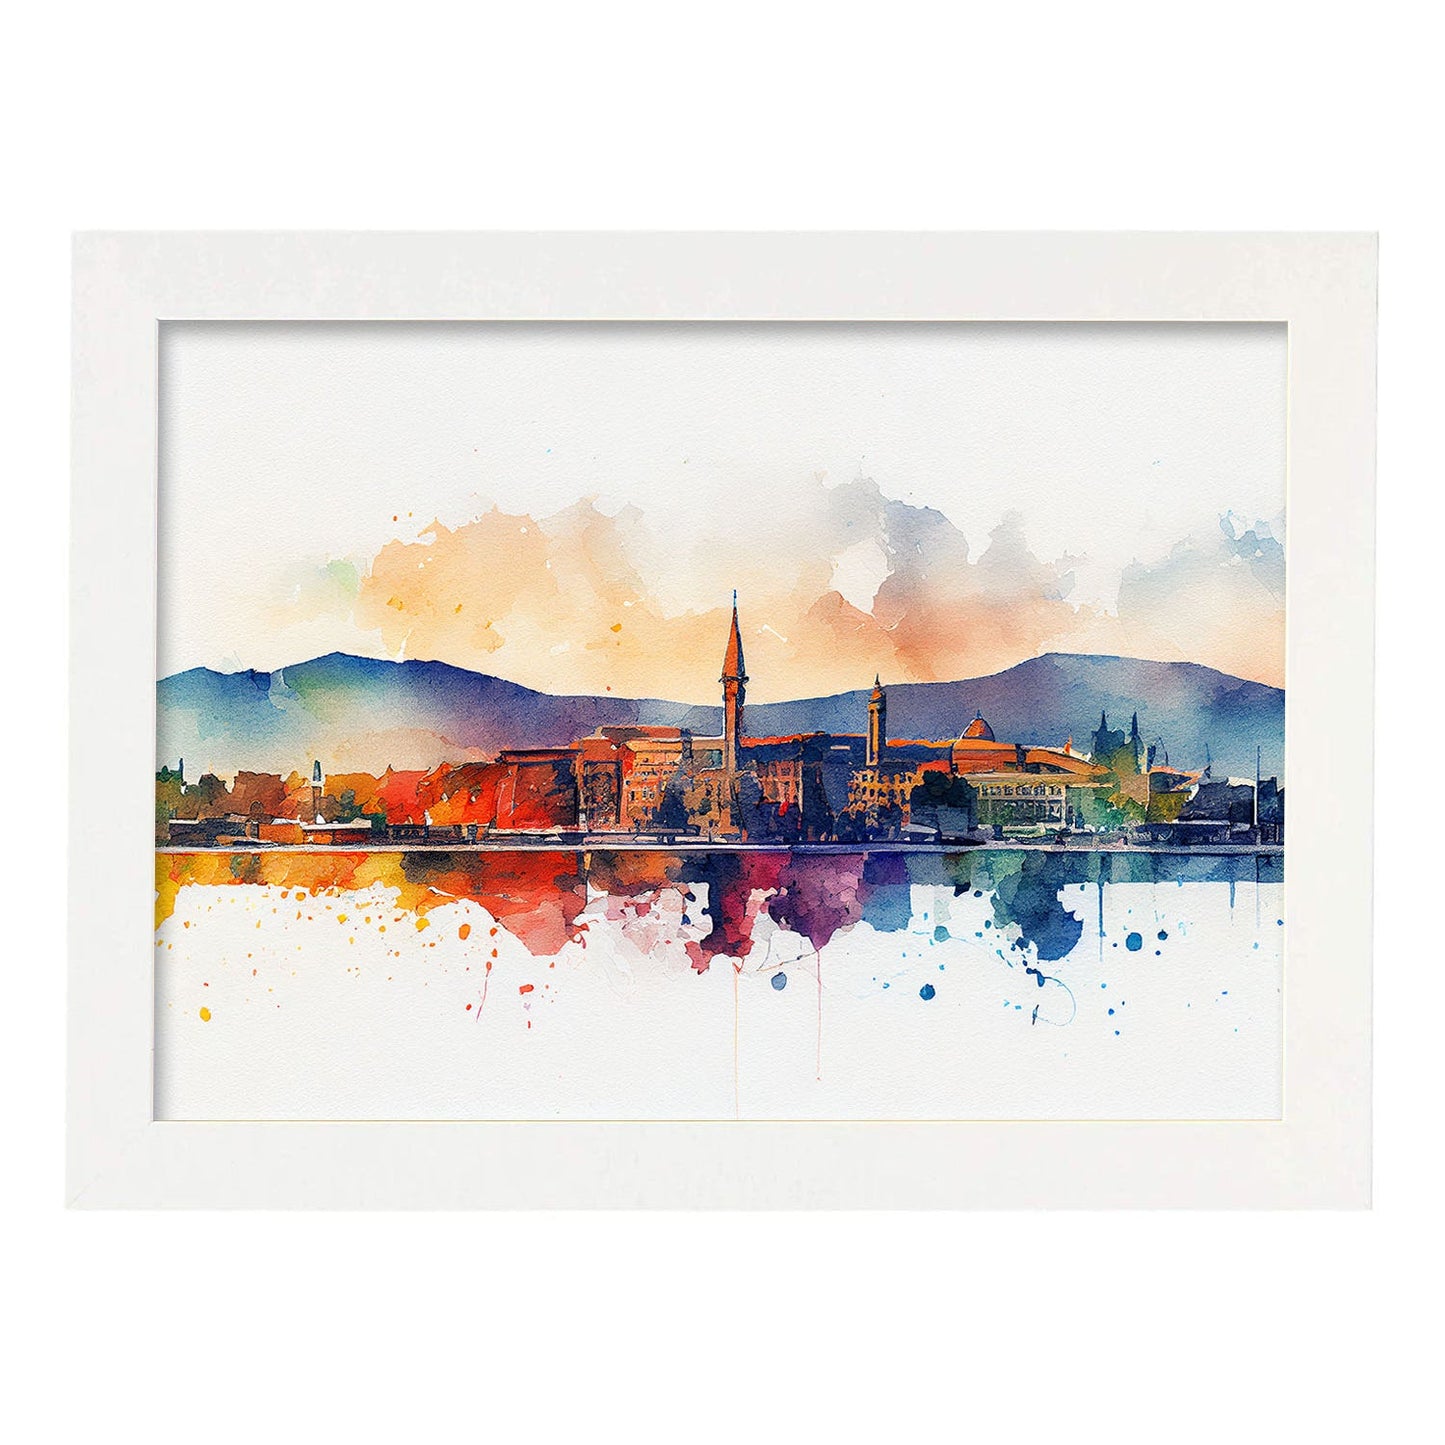 Nacnic watercolor of a skyline of the city of Geneva_2. Aesthetic Wall Art Prints for Bedroom or Living Room Design.-Artwork-Nacnic-A4-Marco Blanco-Nacnic Estudio SL